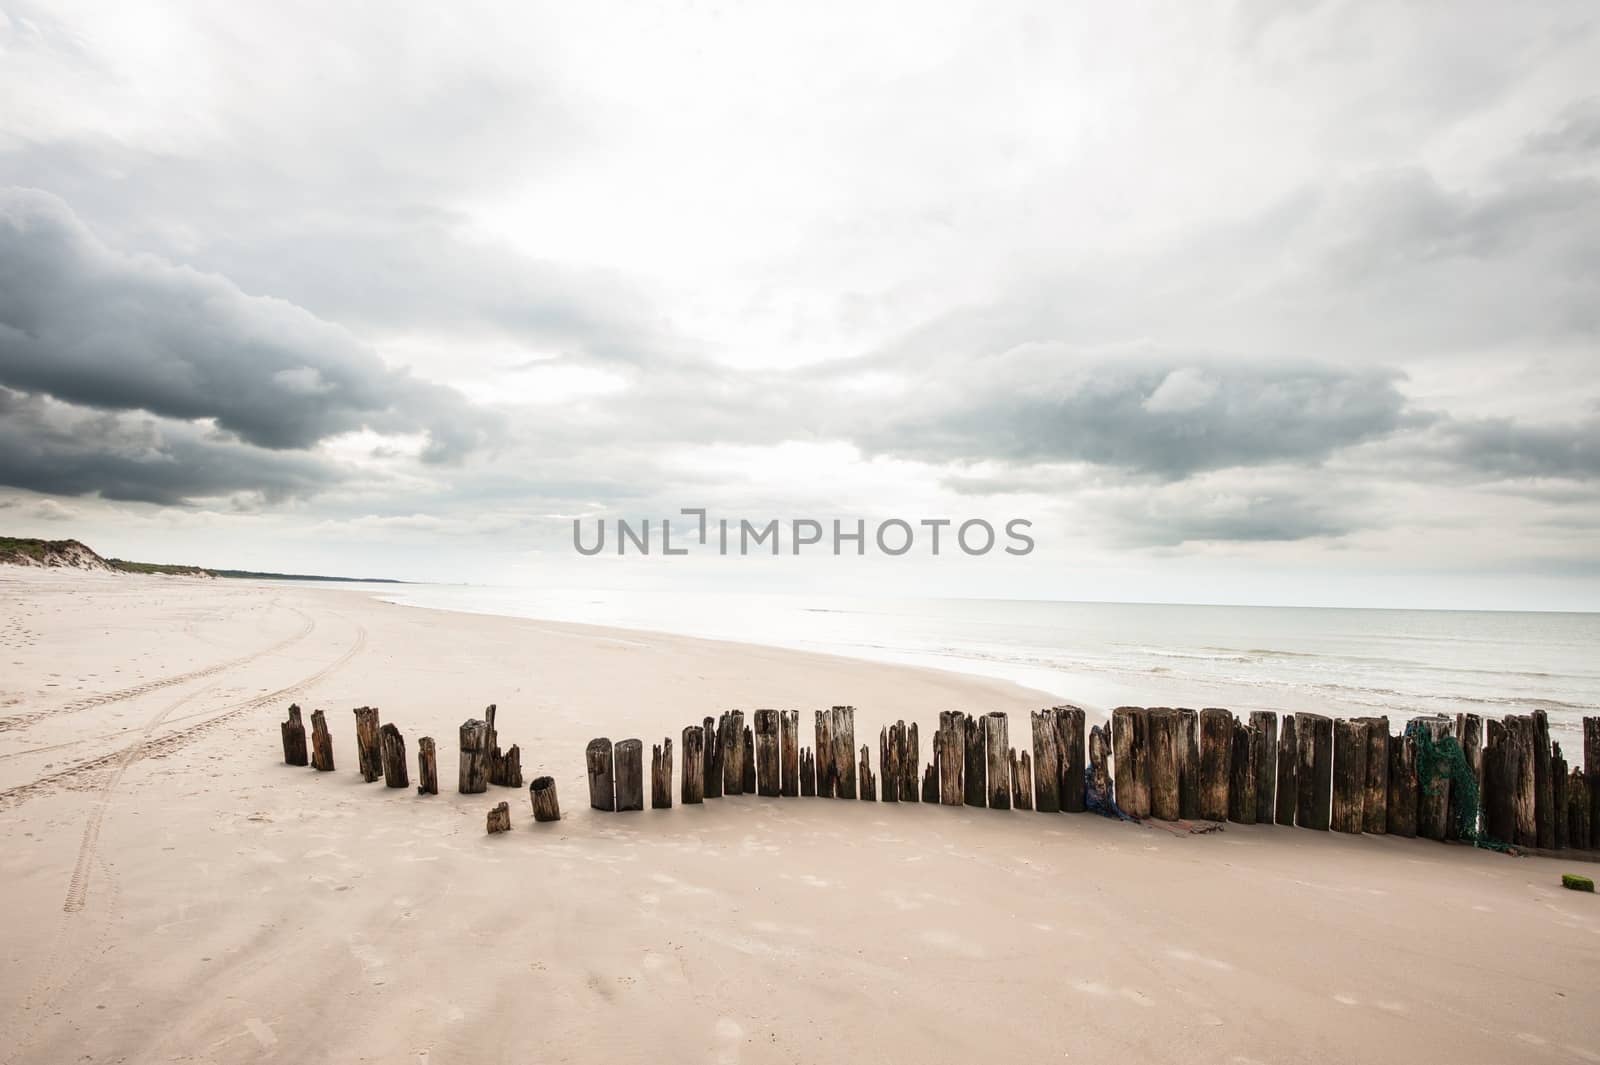 Poles in the sand at the beach in Tversted in Denmark